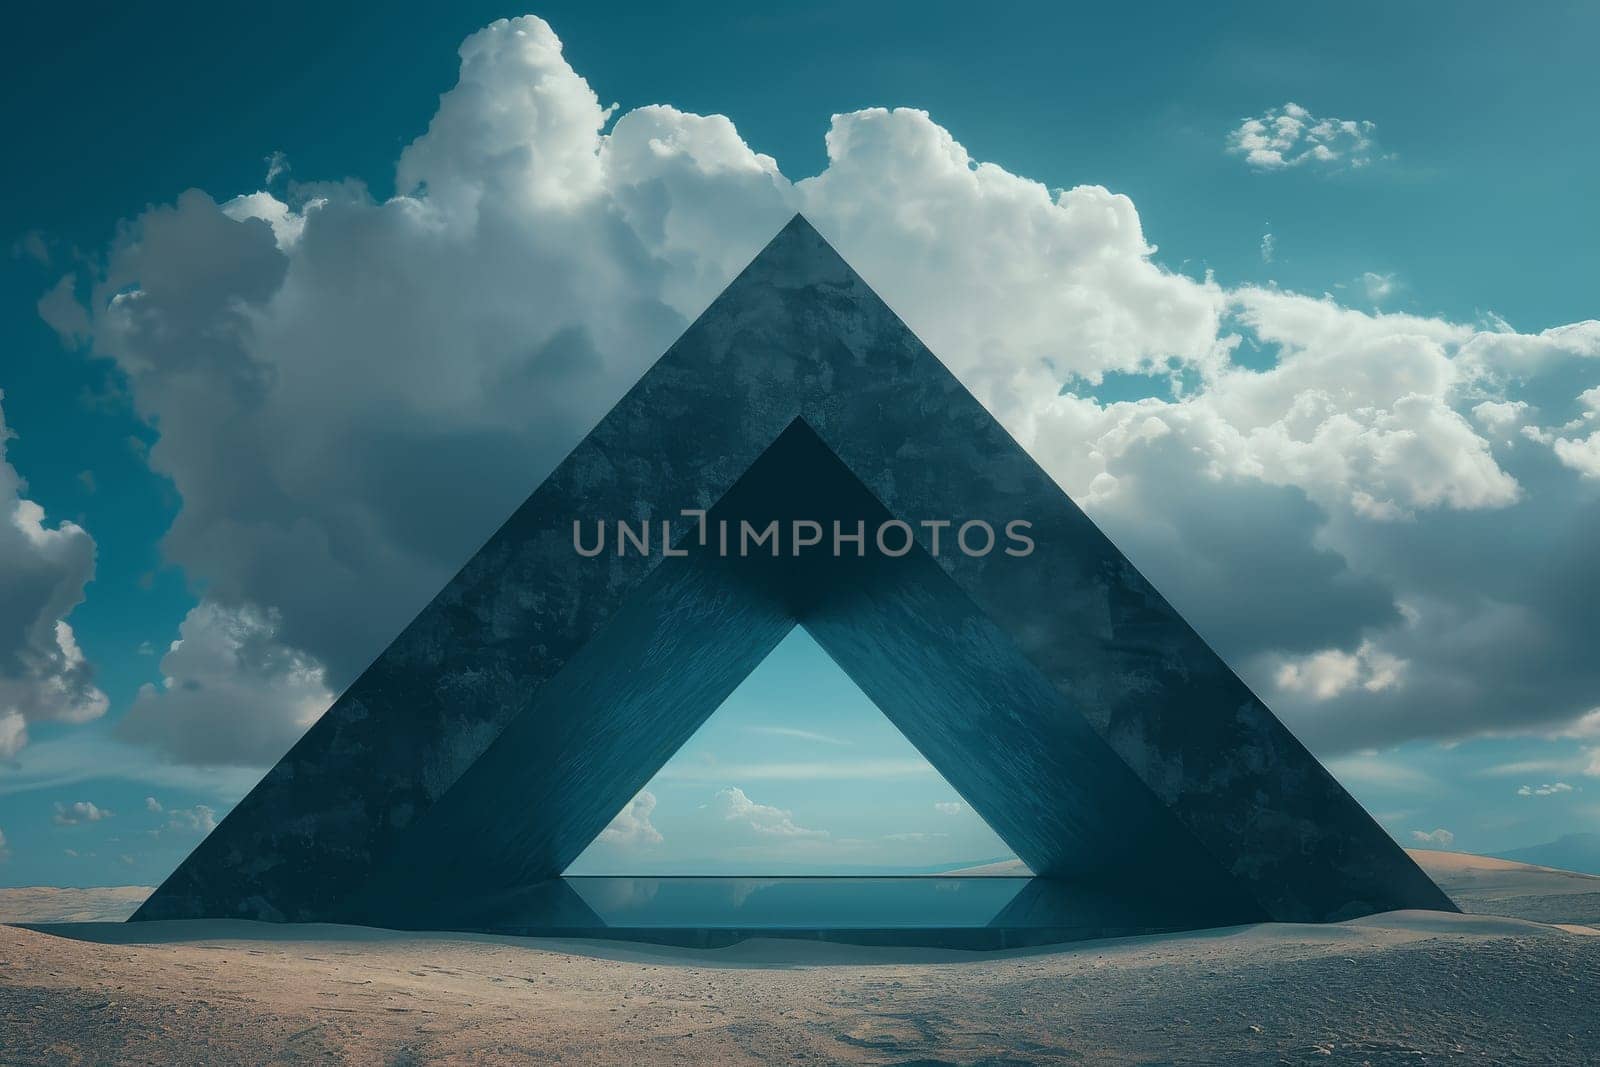 A large pyramid with a triangular entrance is surrounded by a cloudy sky. The image has a mysterious and intriguing mood, as the pyramid seems to be a gateway to another world or dimension